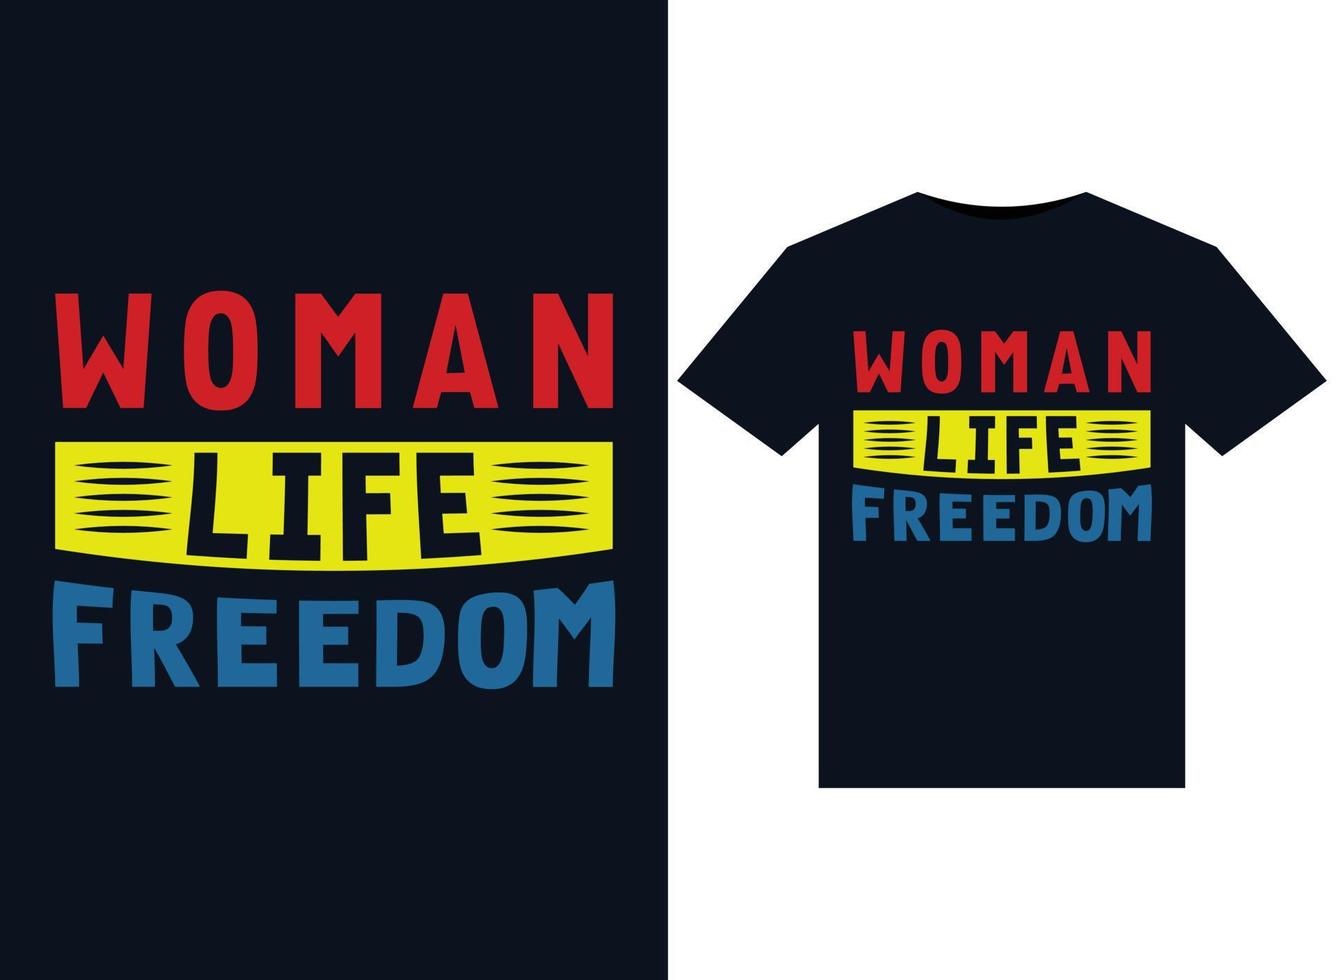 Woman Life Freedom illustrations for print-ready T-Shirts design vector